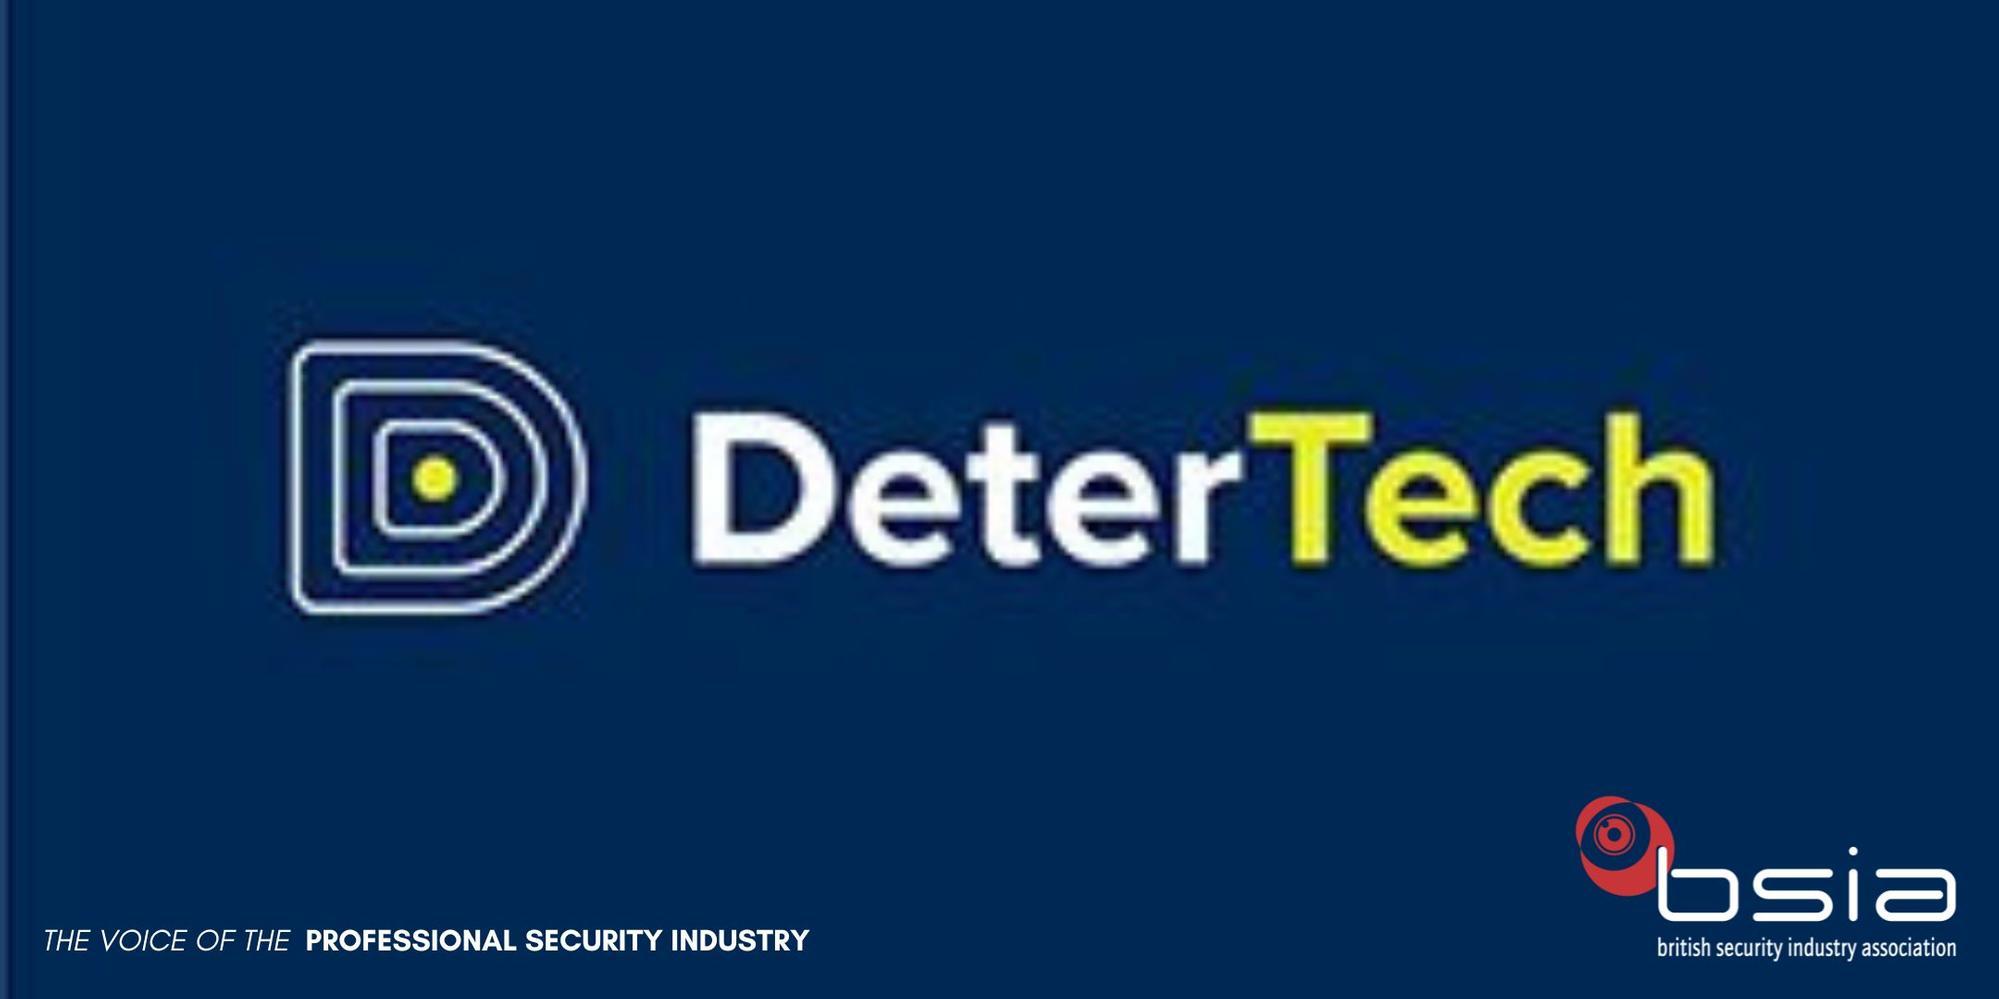 SmartWater Group unveils major rebrand to become DeterTech